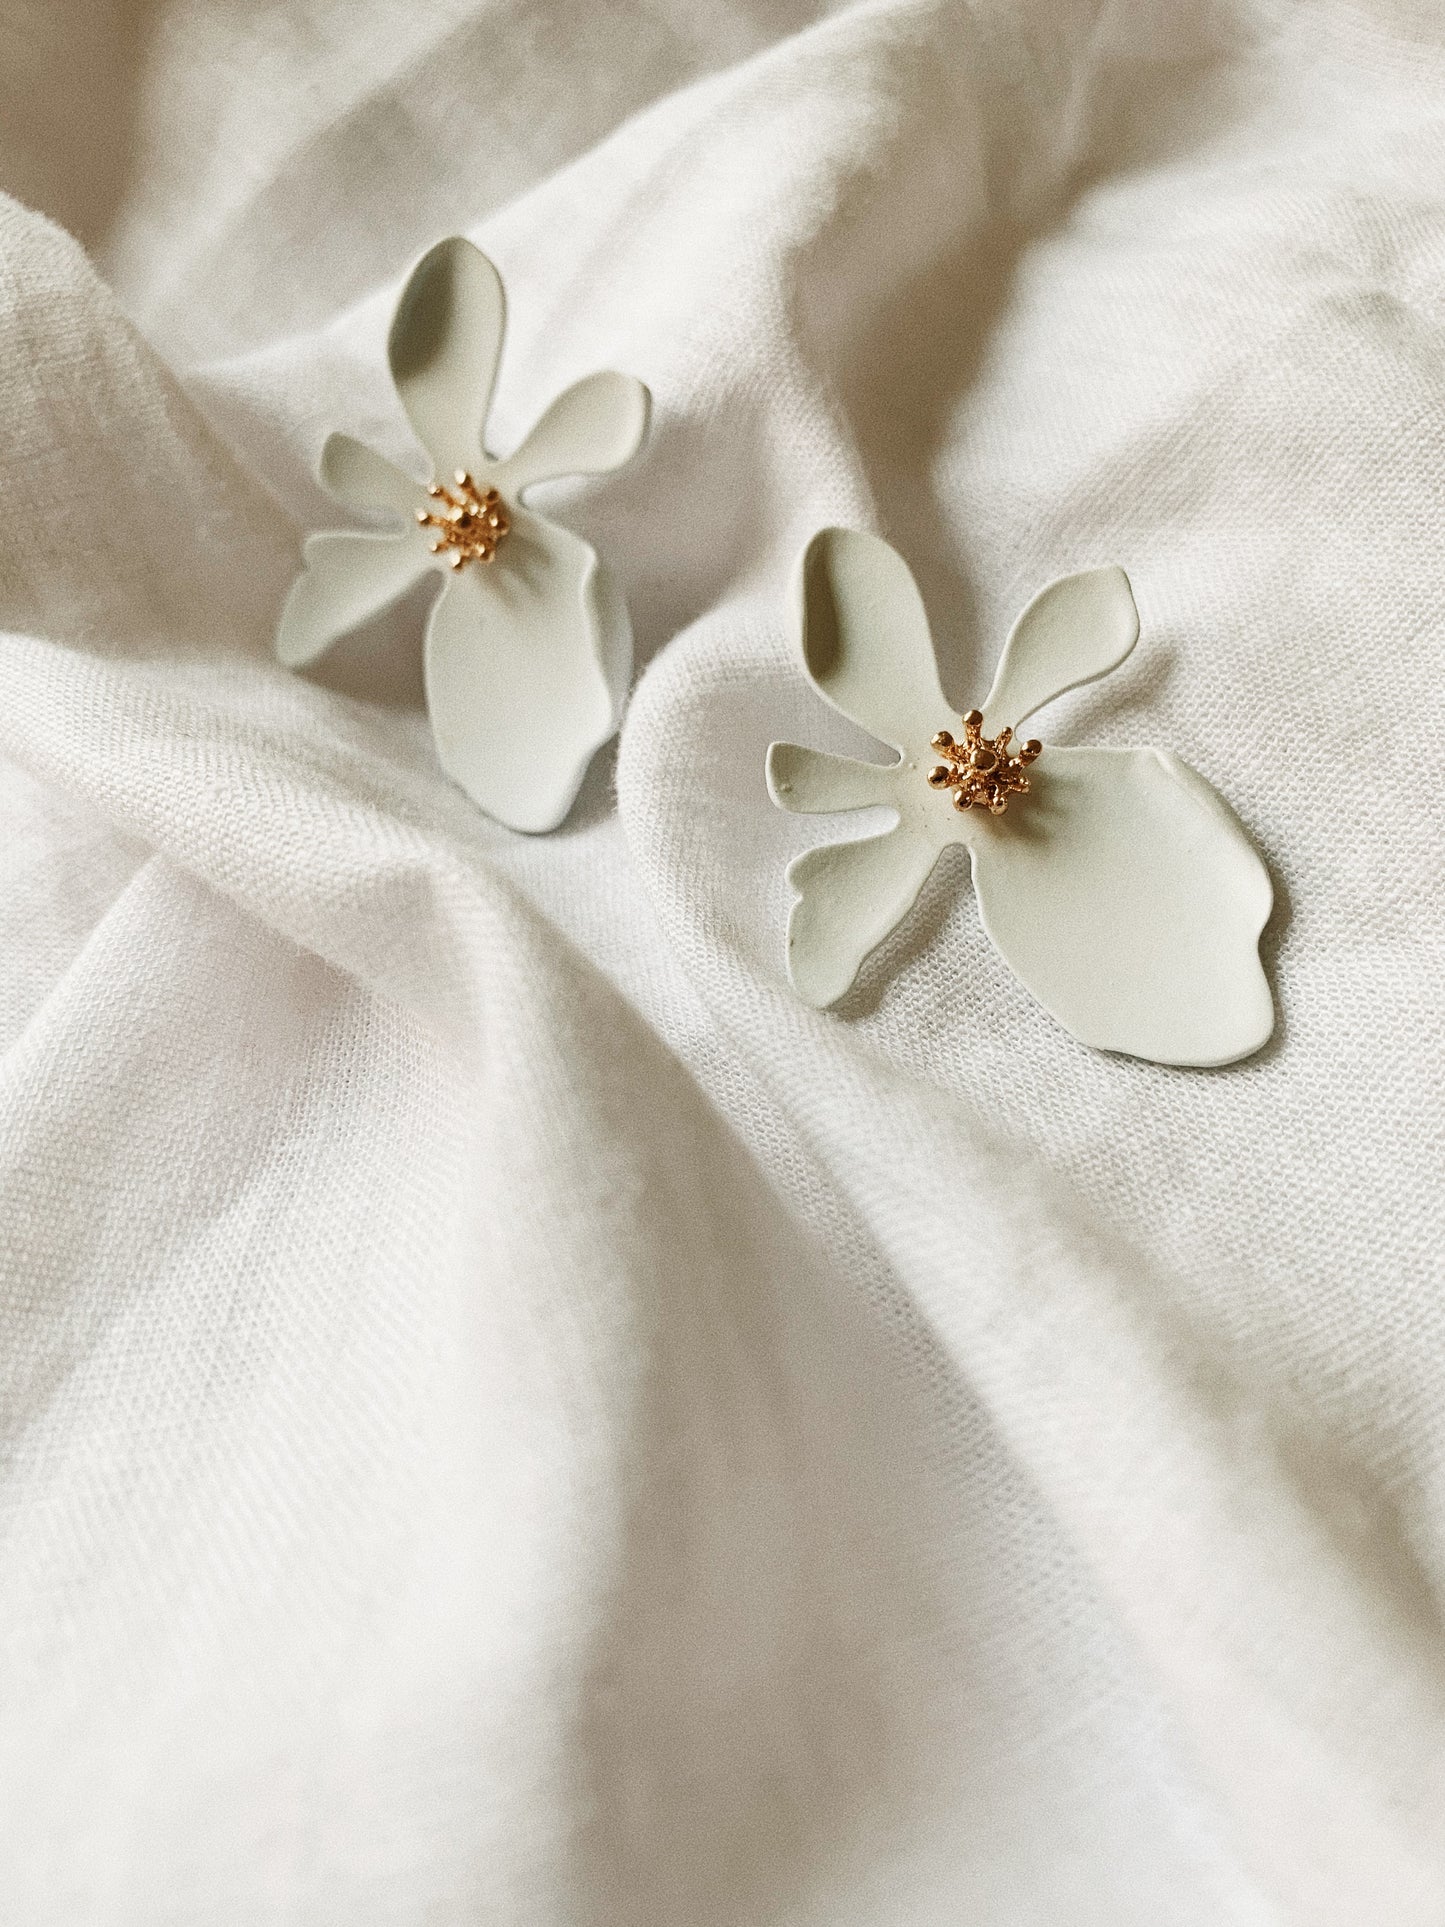 FLORA WHITE Maxi Stud Earrings | By: Life in the sun store